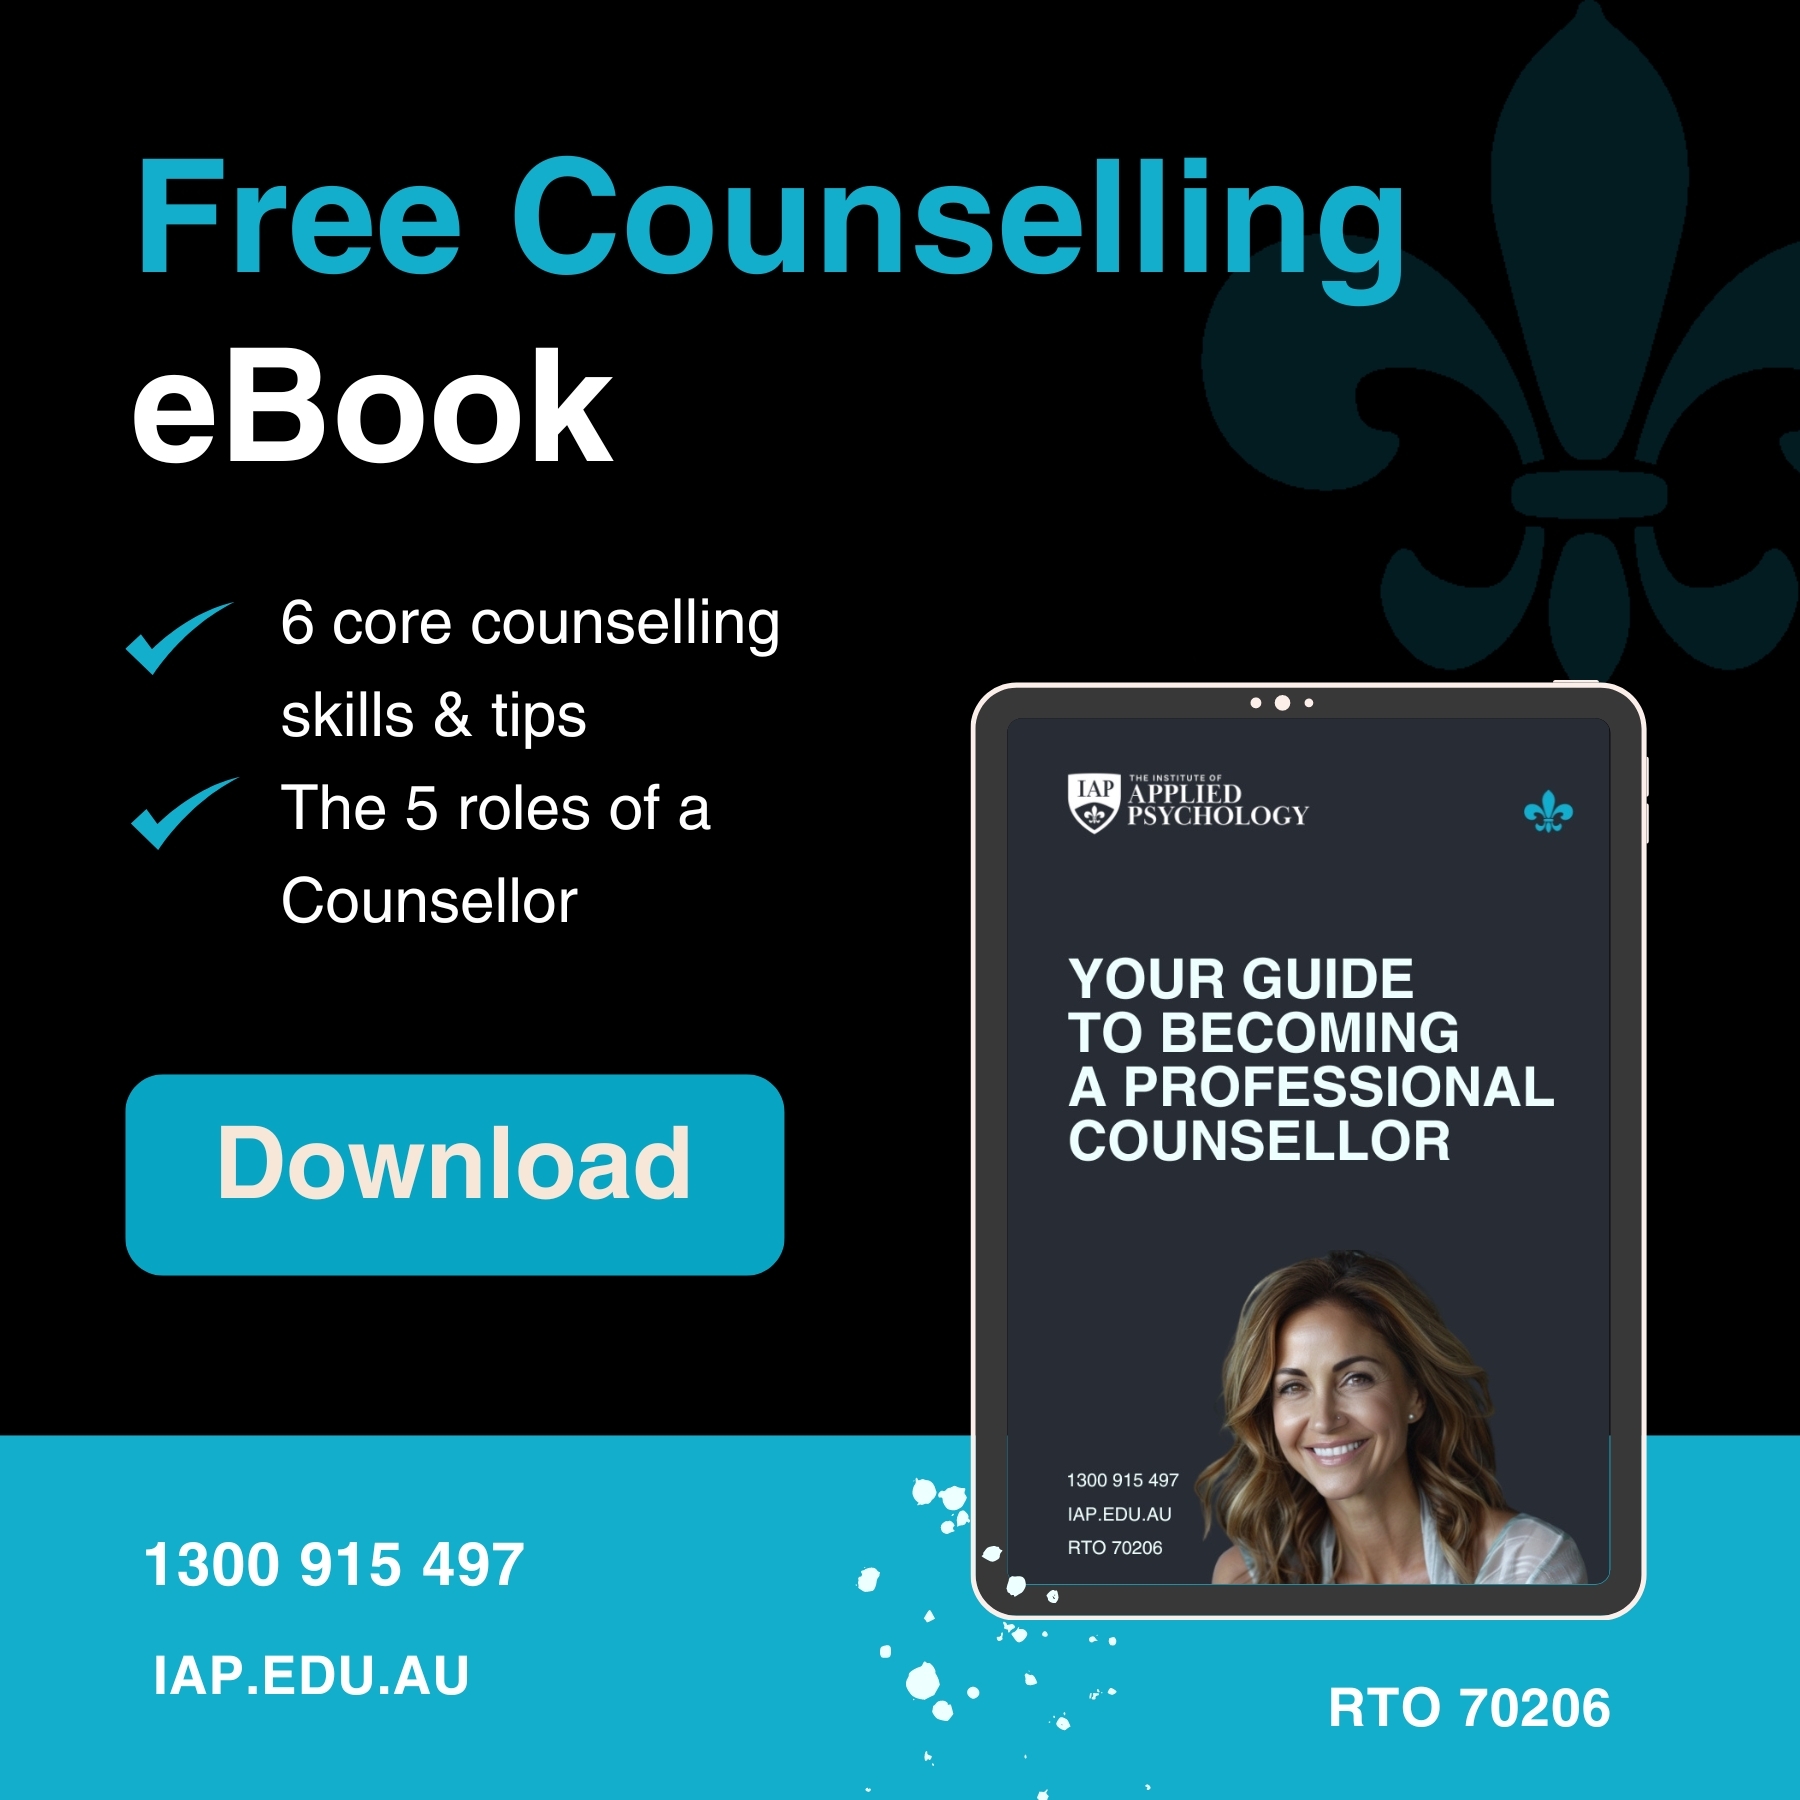 Your Guide to Becoming a Professional Counsellor